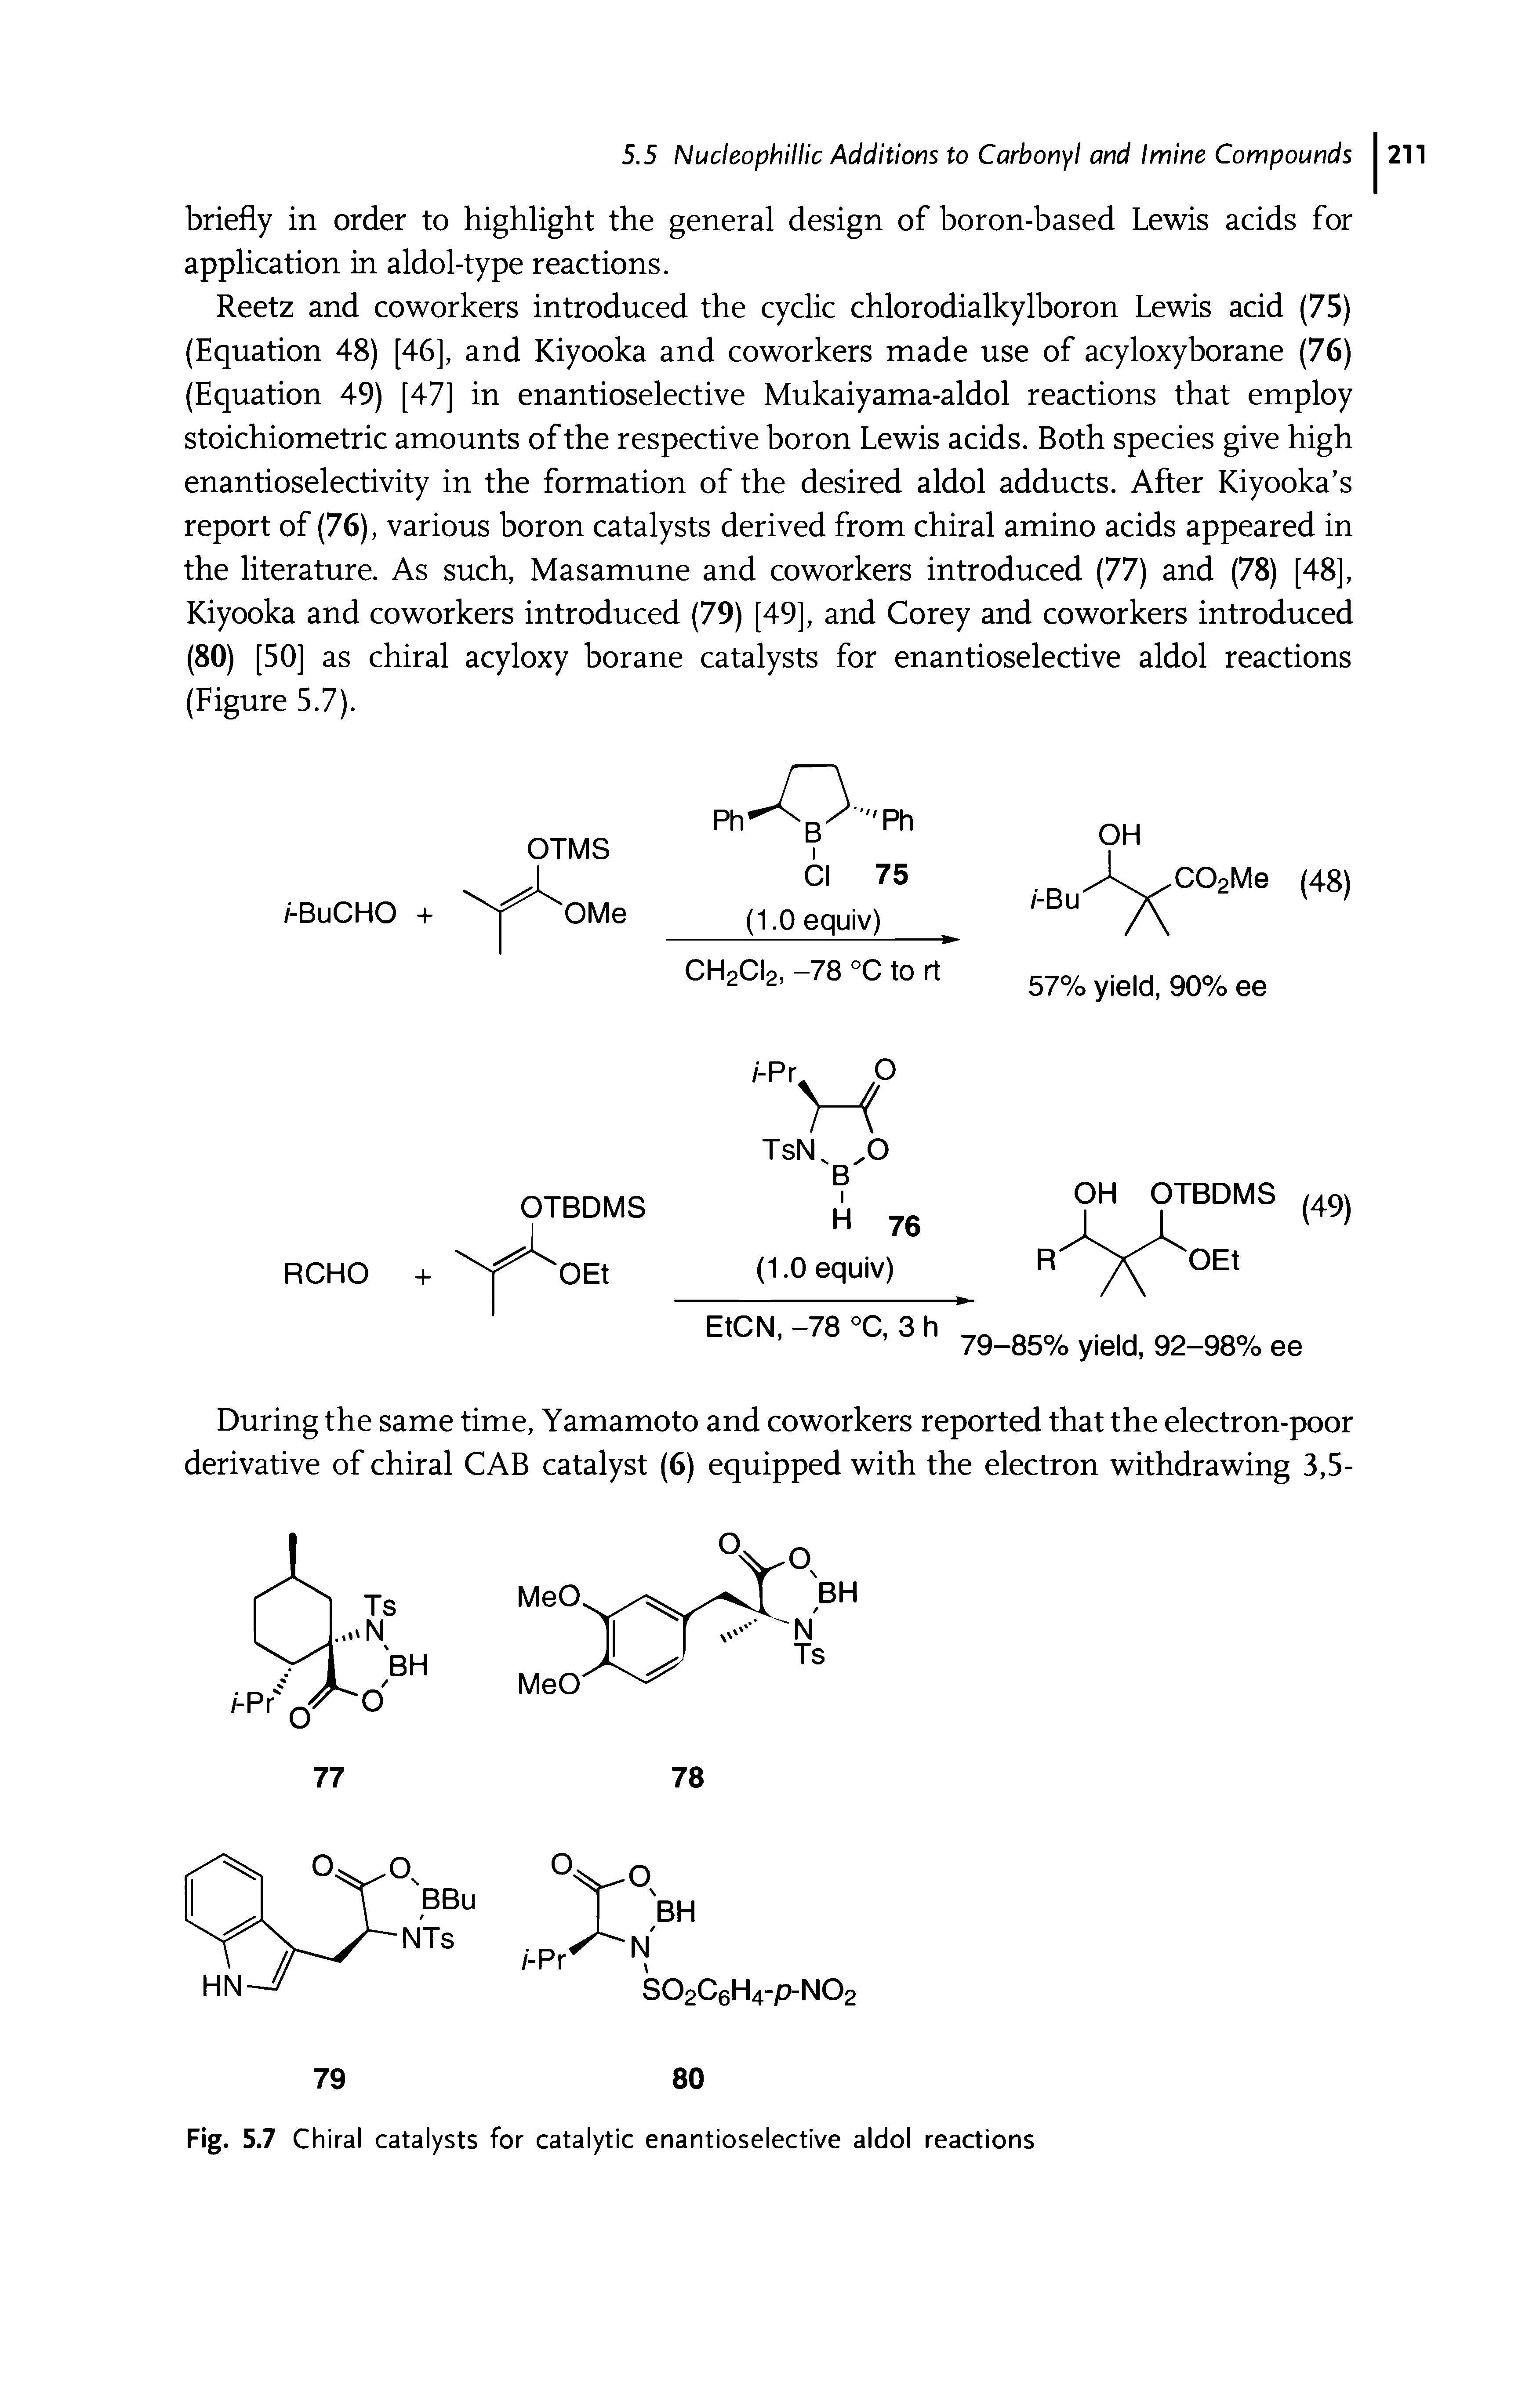 Fig. 5.7 Chiral catalysts for catalytic enantioselective aldol reactions...